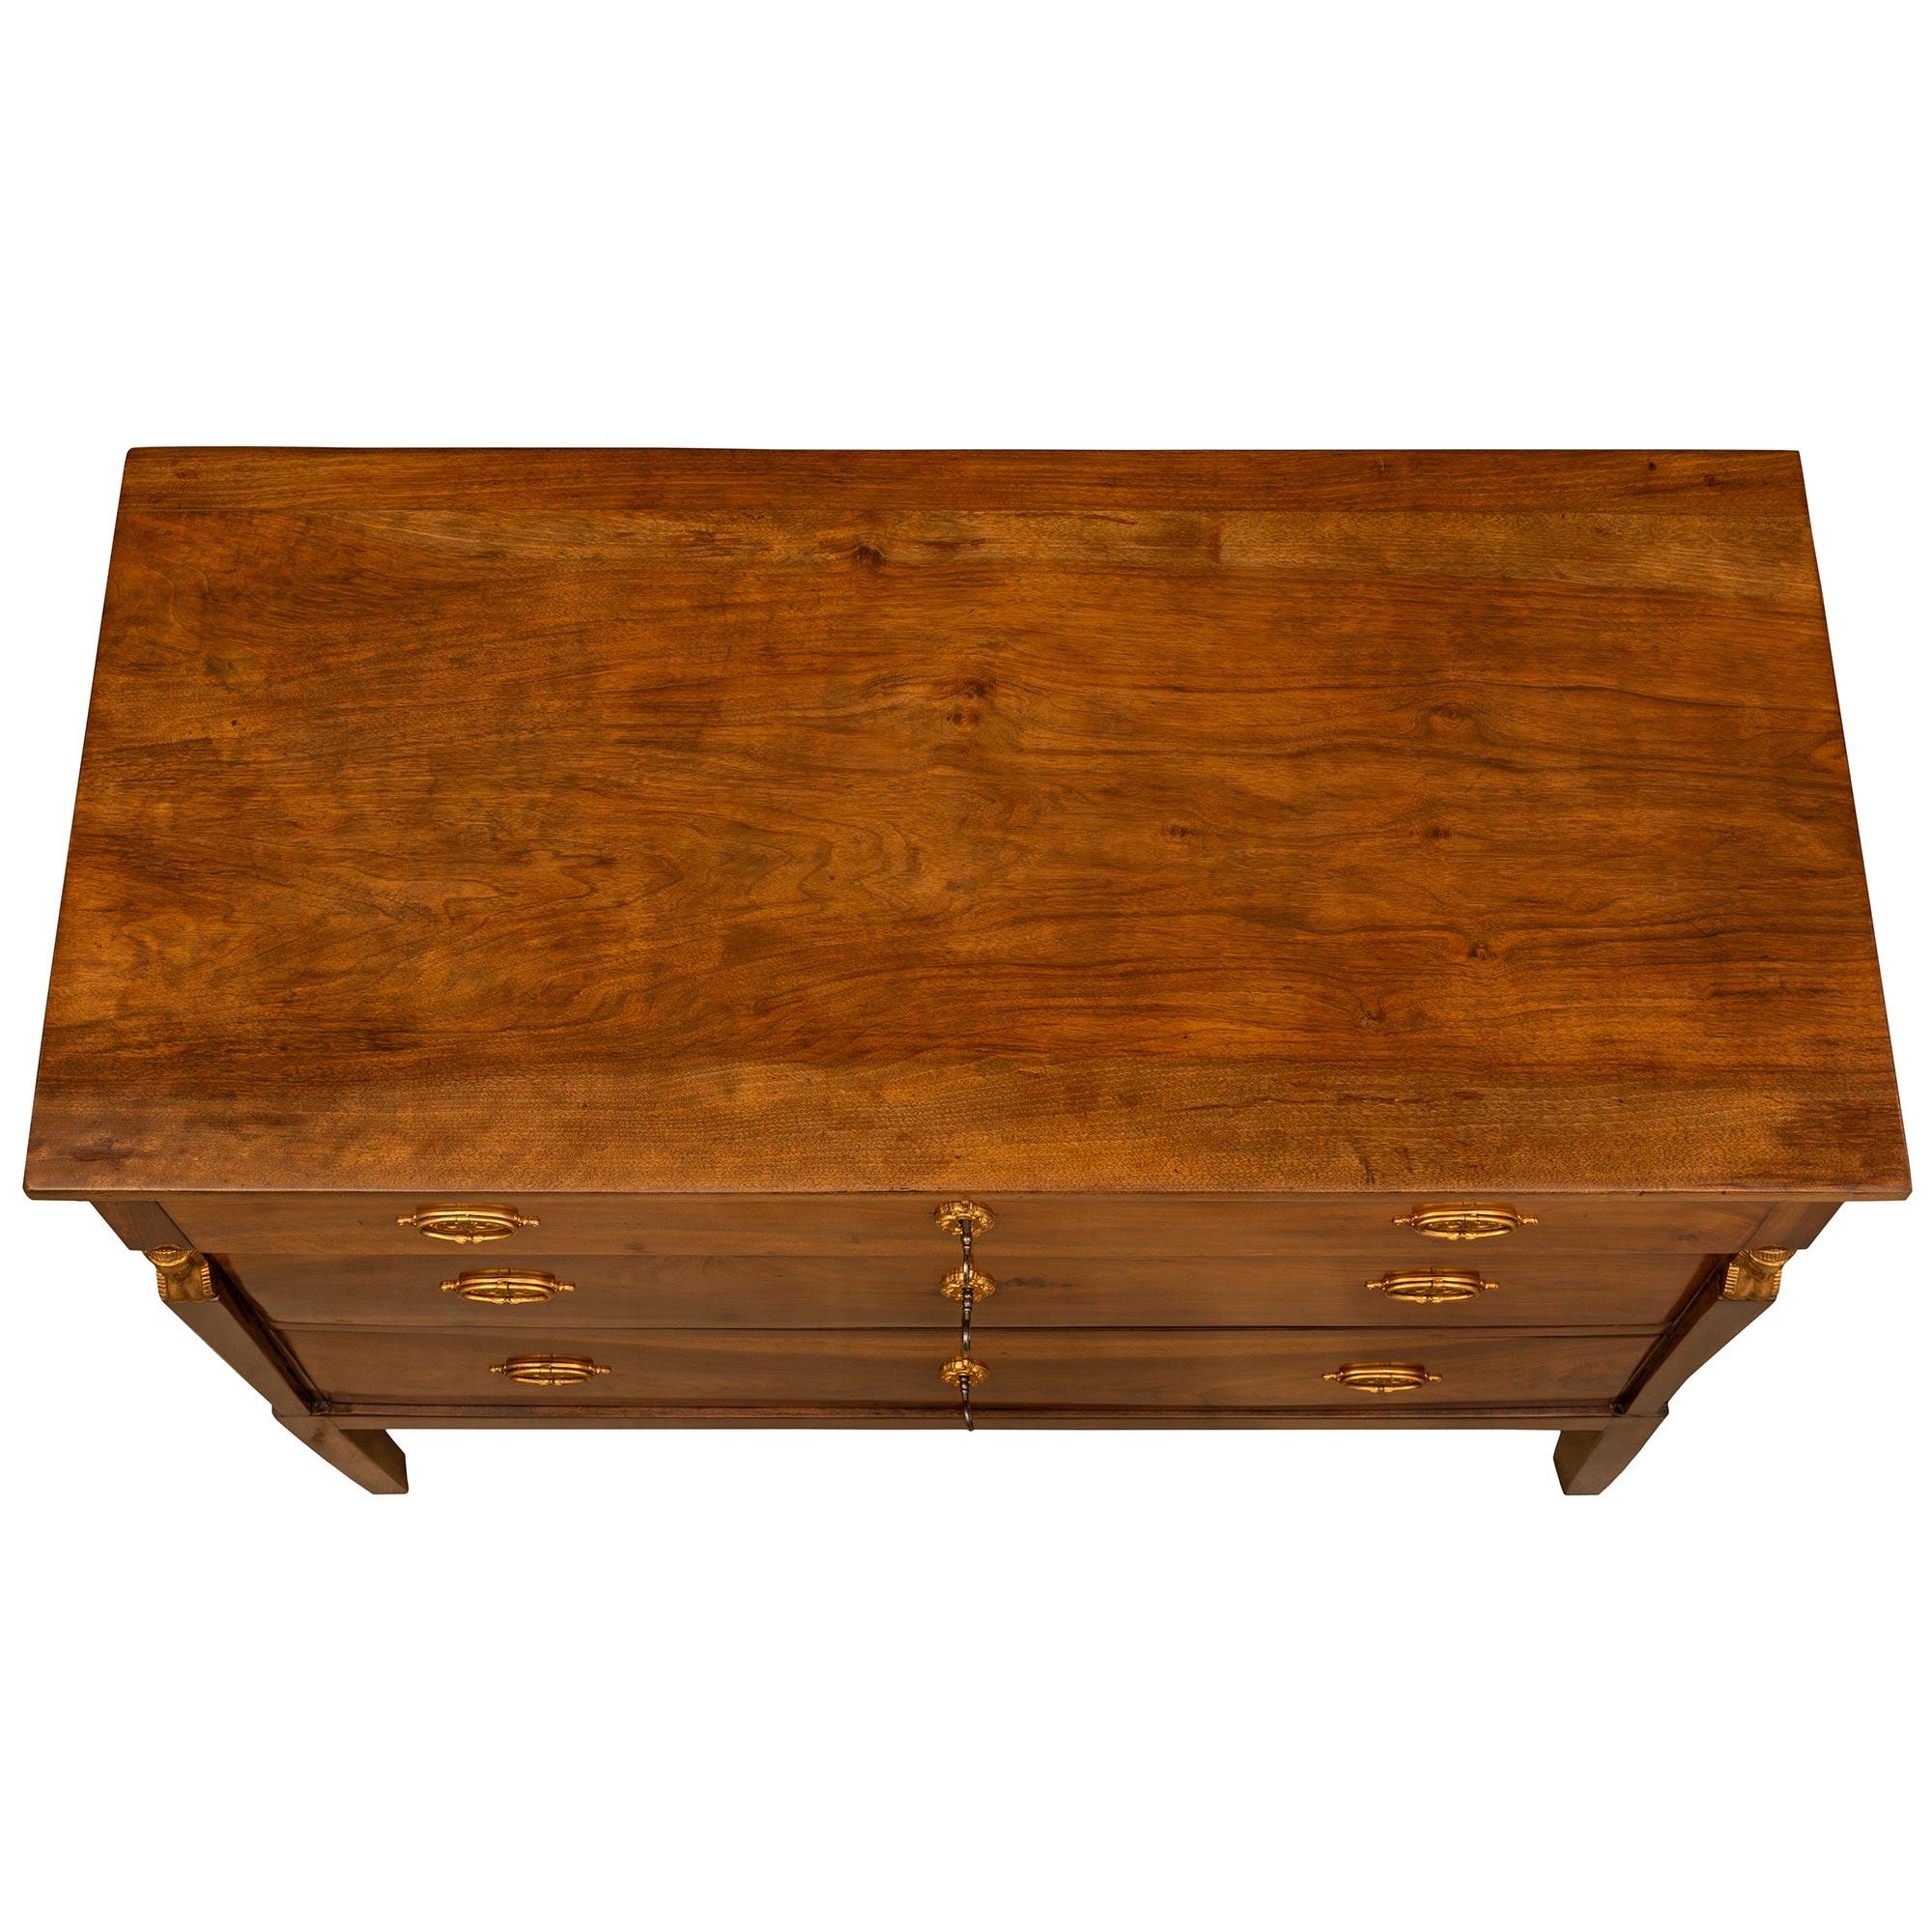 A very handsome Italian 19th century neoclassical St. walnut and ormolu commode. The chest is raised on square tapered legs, topped with finely chased ormolu cariatides. Three wide drawers decorated with satin and burnish finished ormolu pulls